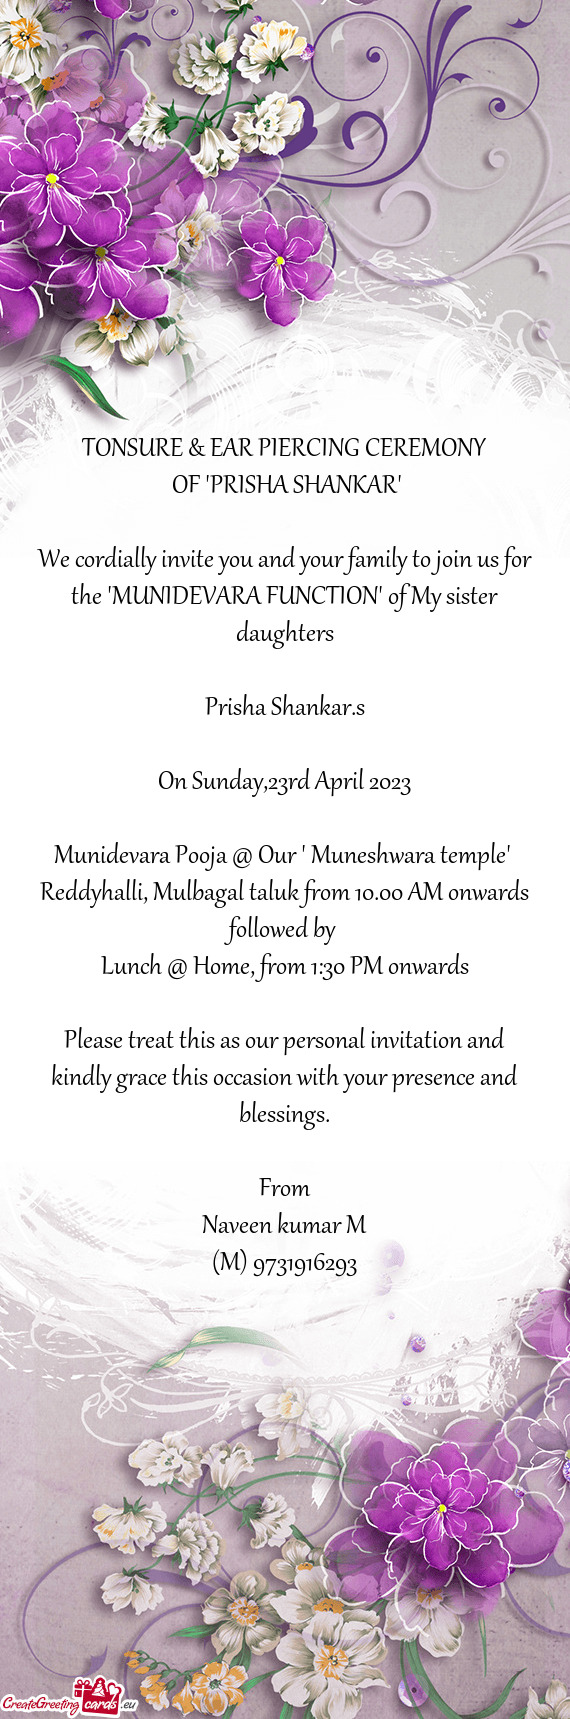 We cordially invite you and your family to join us for the "MUNIDEVARA FUNCTION" of My sister daught